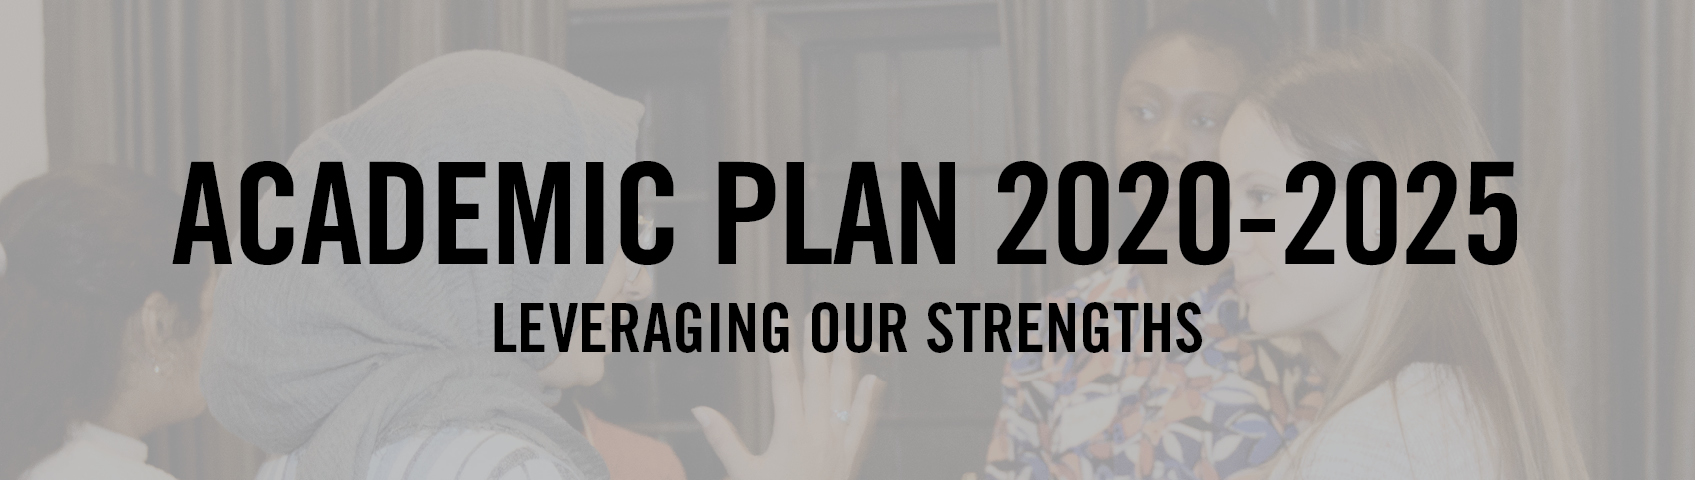 Academic Plan 2020-2025 - Leveraging Our Strengths